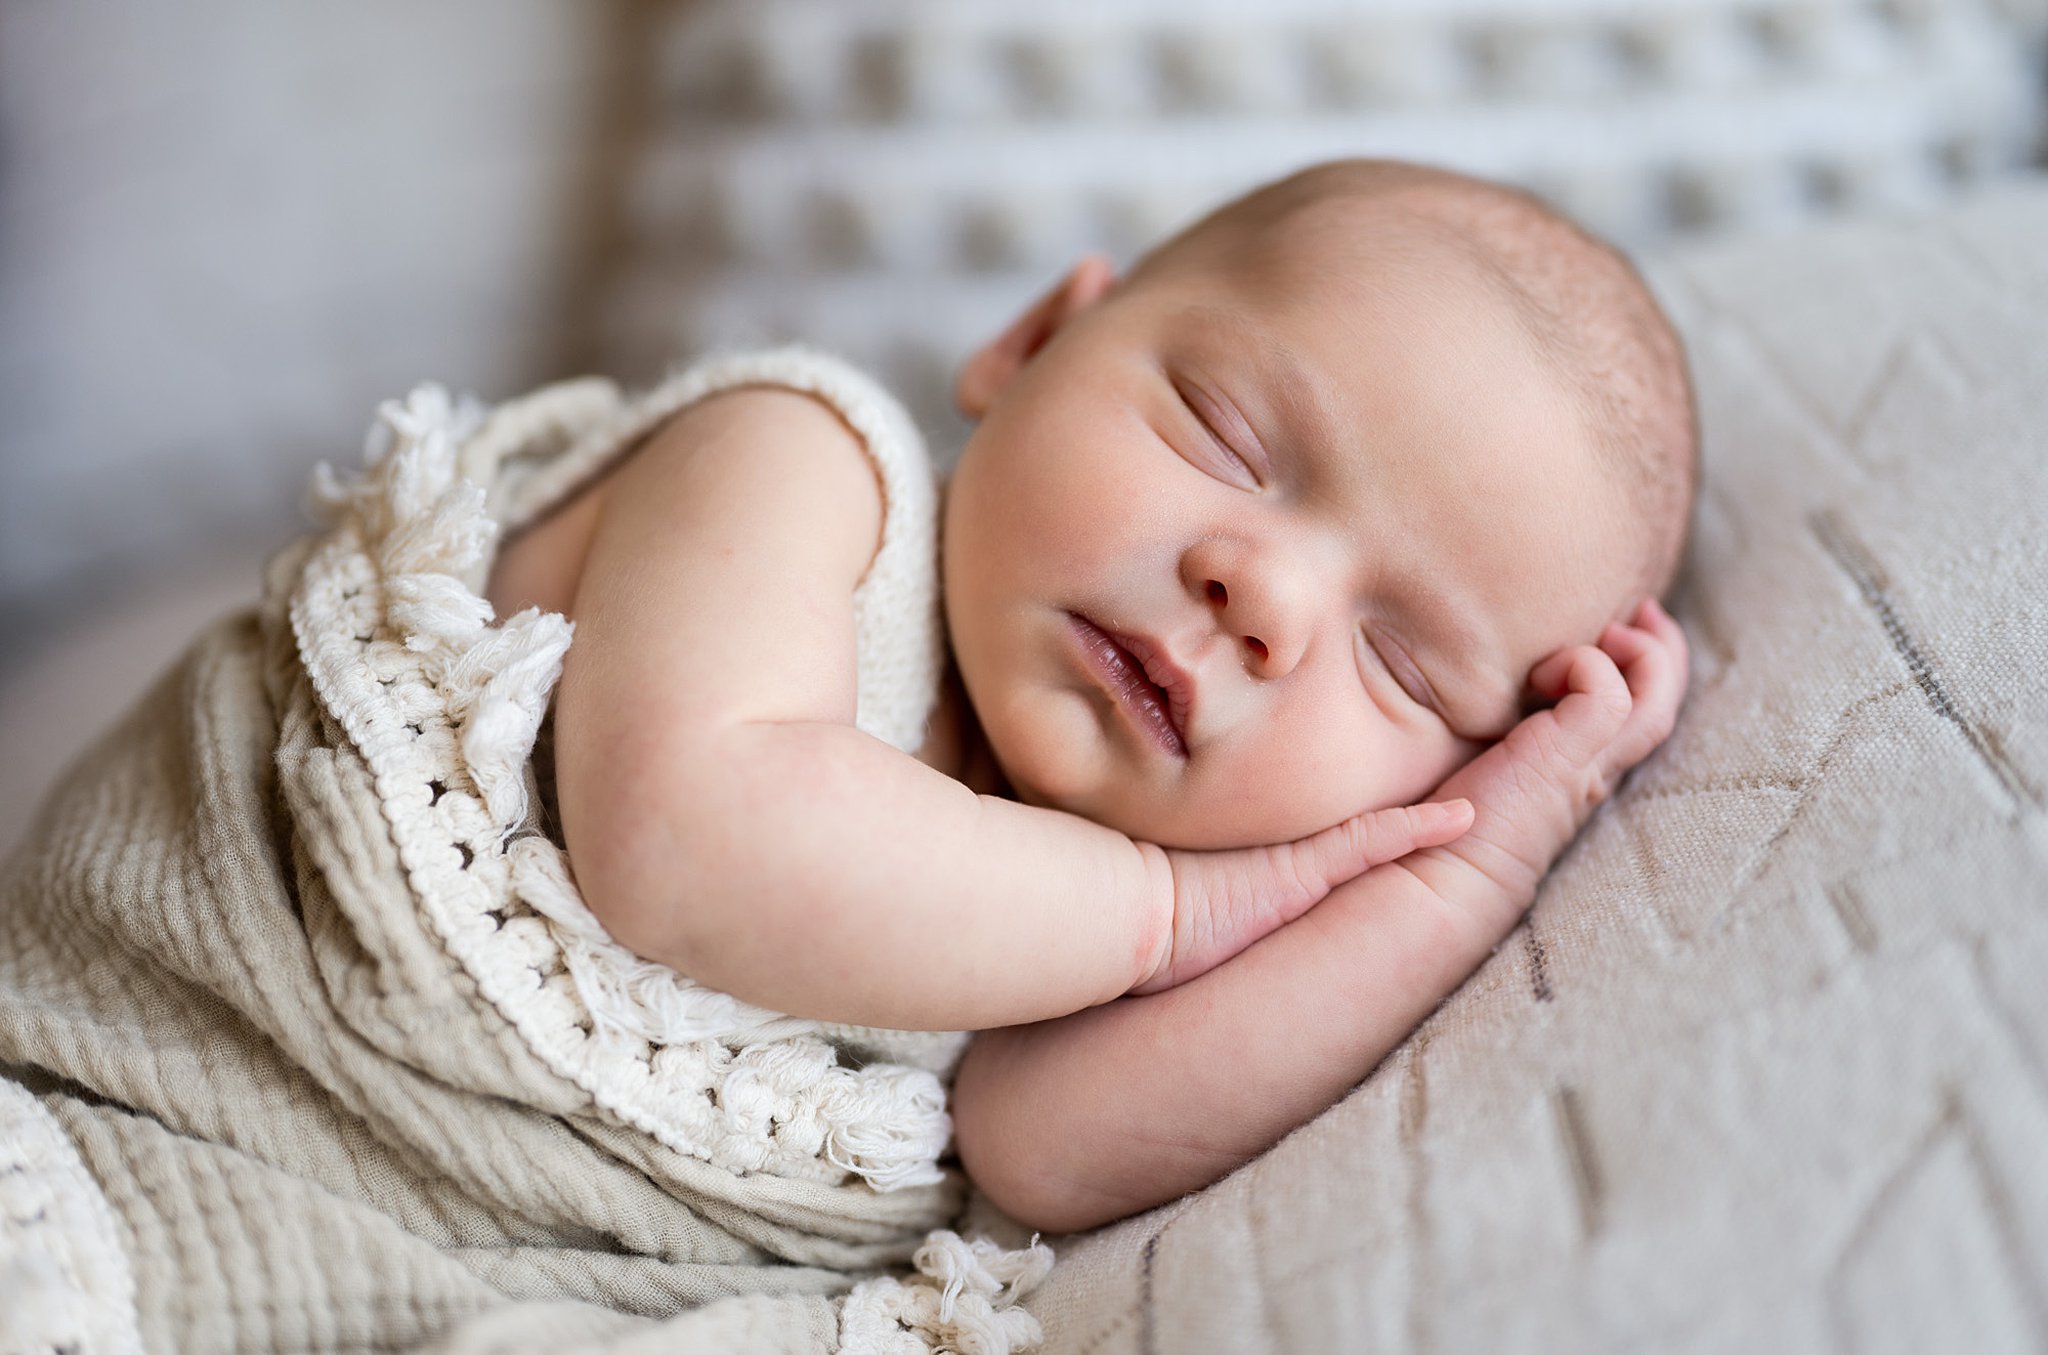 Newborn in knit overalls sleeps on their hands on a pillow baby stores in ottawa